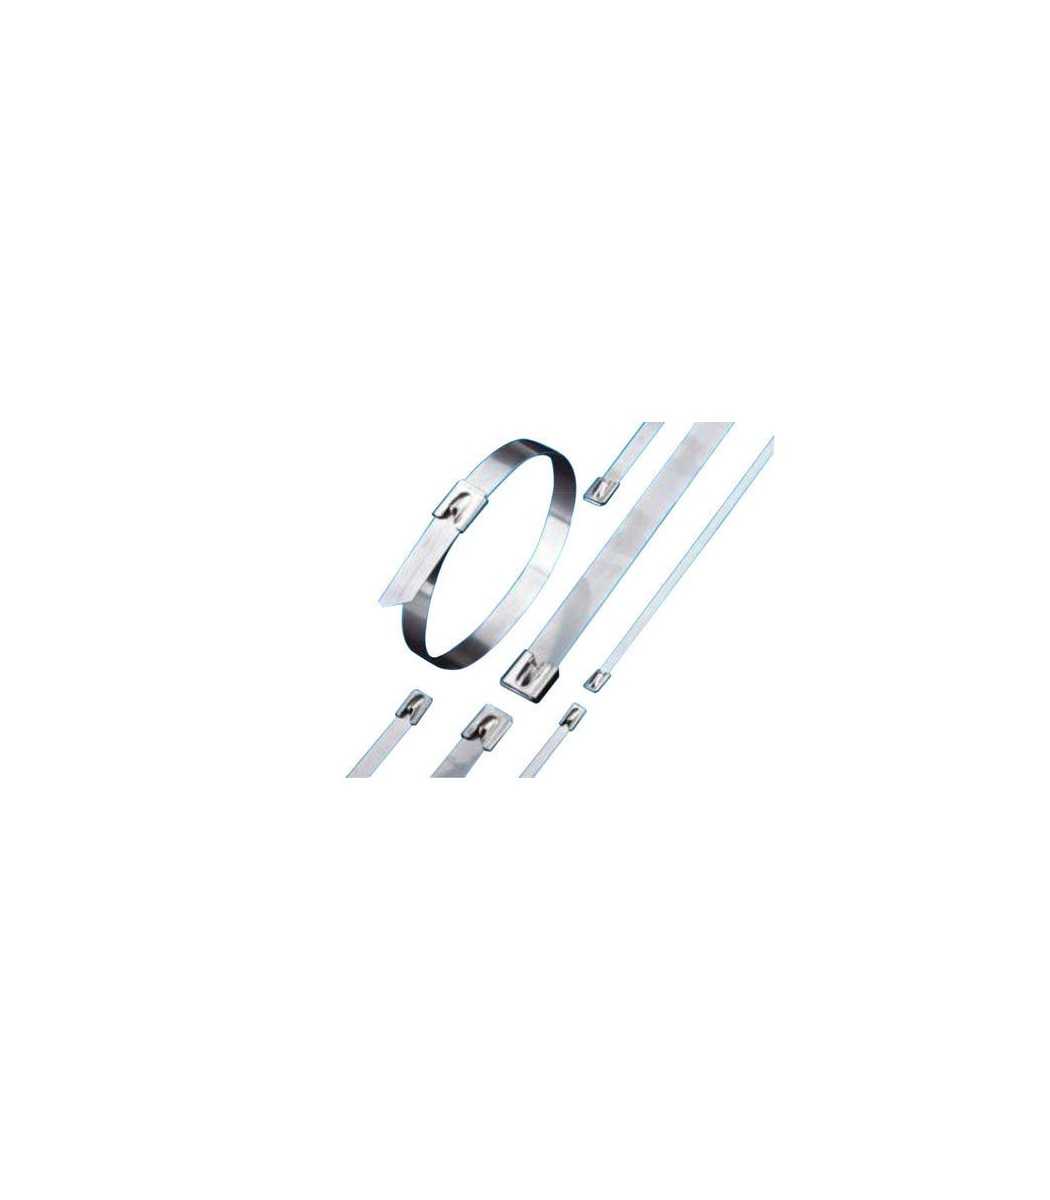 Stainless Steel Uncoated Ball Lock Cable Tie